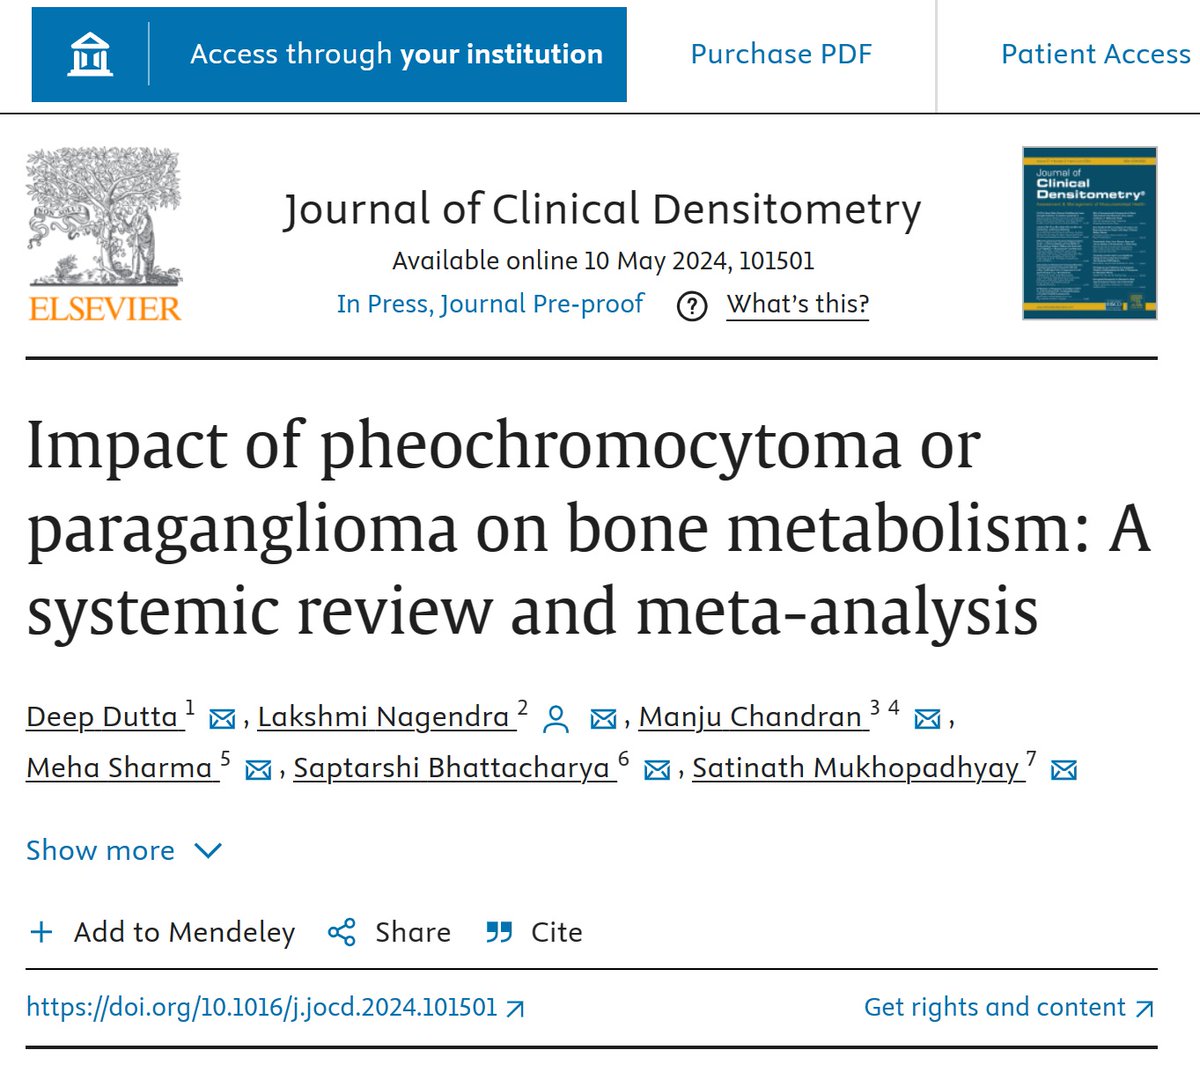 People living with #pheochromocytoma & #paraganglioma have significantly lower #TrabecularBoneScore, increased bone turnover markers & impaired #bone health. 
Some recovery does happen post #surgical #cure.
These people deserve to be #handled with #care to prevent #fractures;